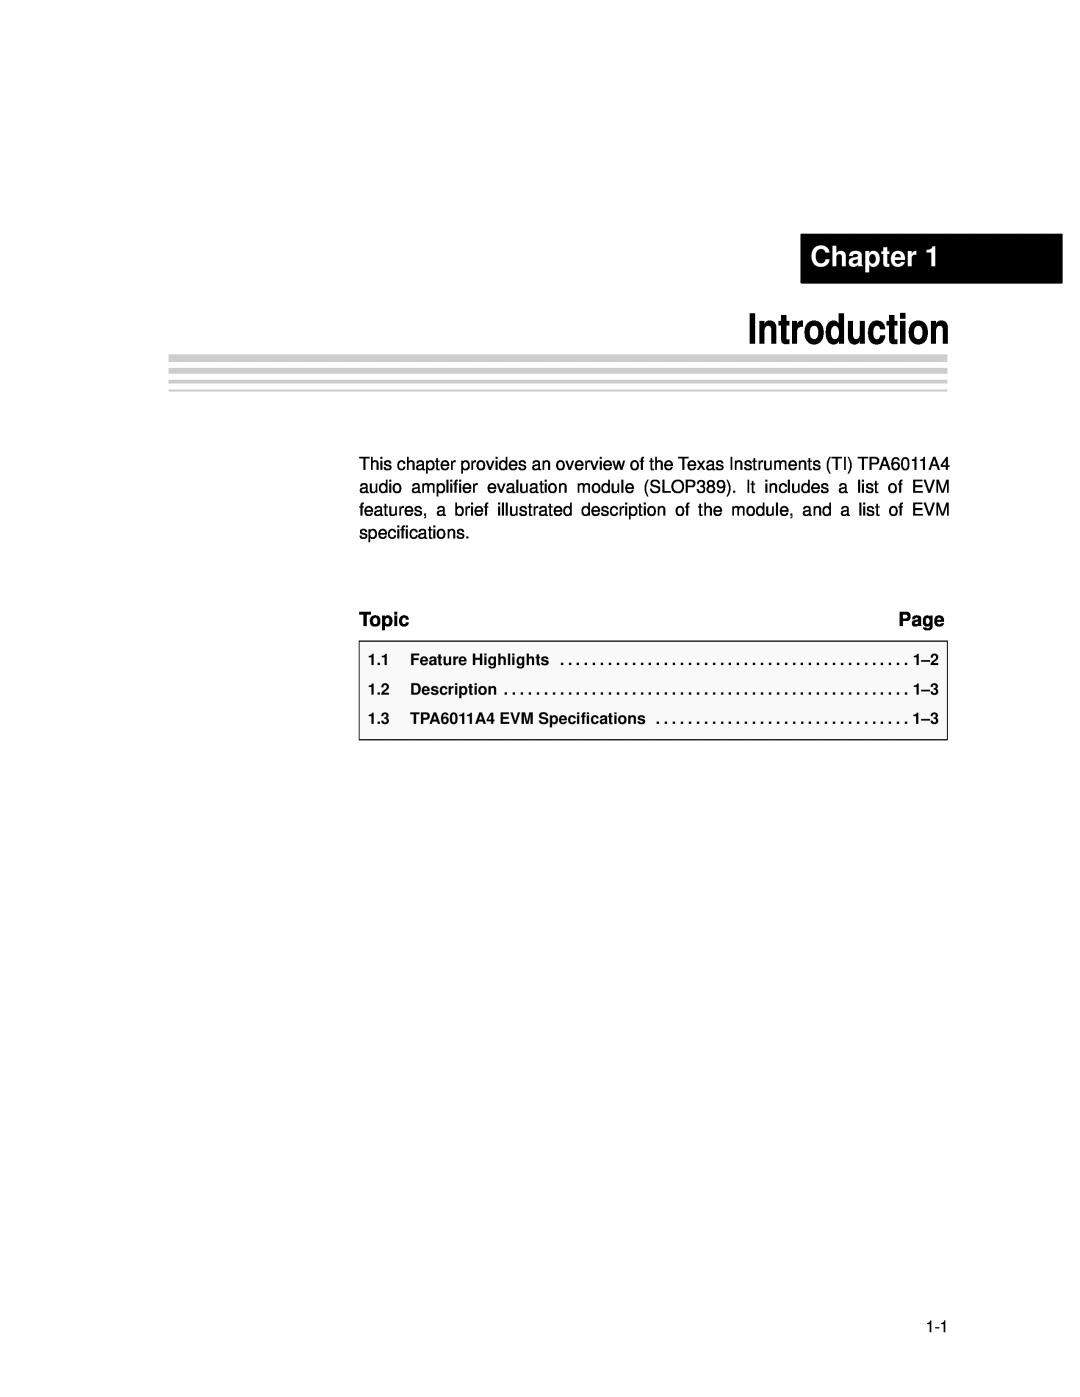 Texas Instruments SLOU121 manual Introduction, Chapter, Page, Topic, Feature Highlights, Description 